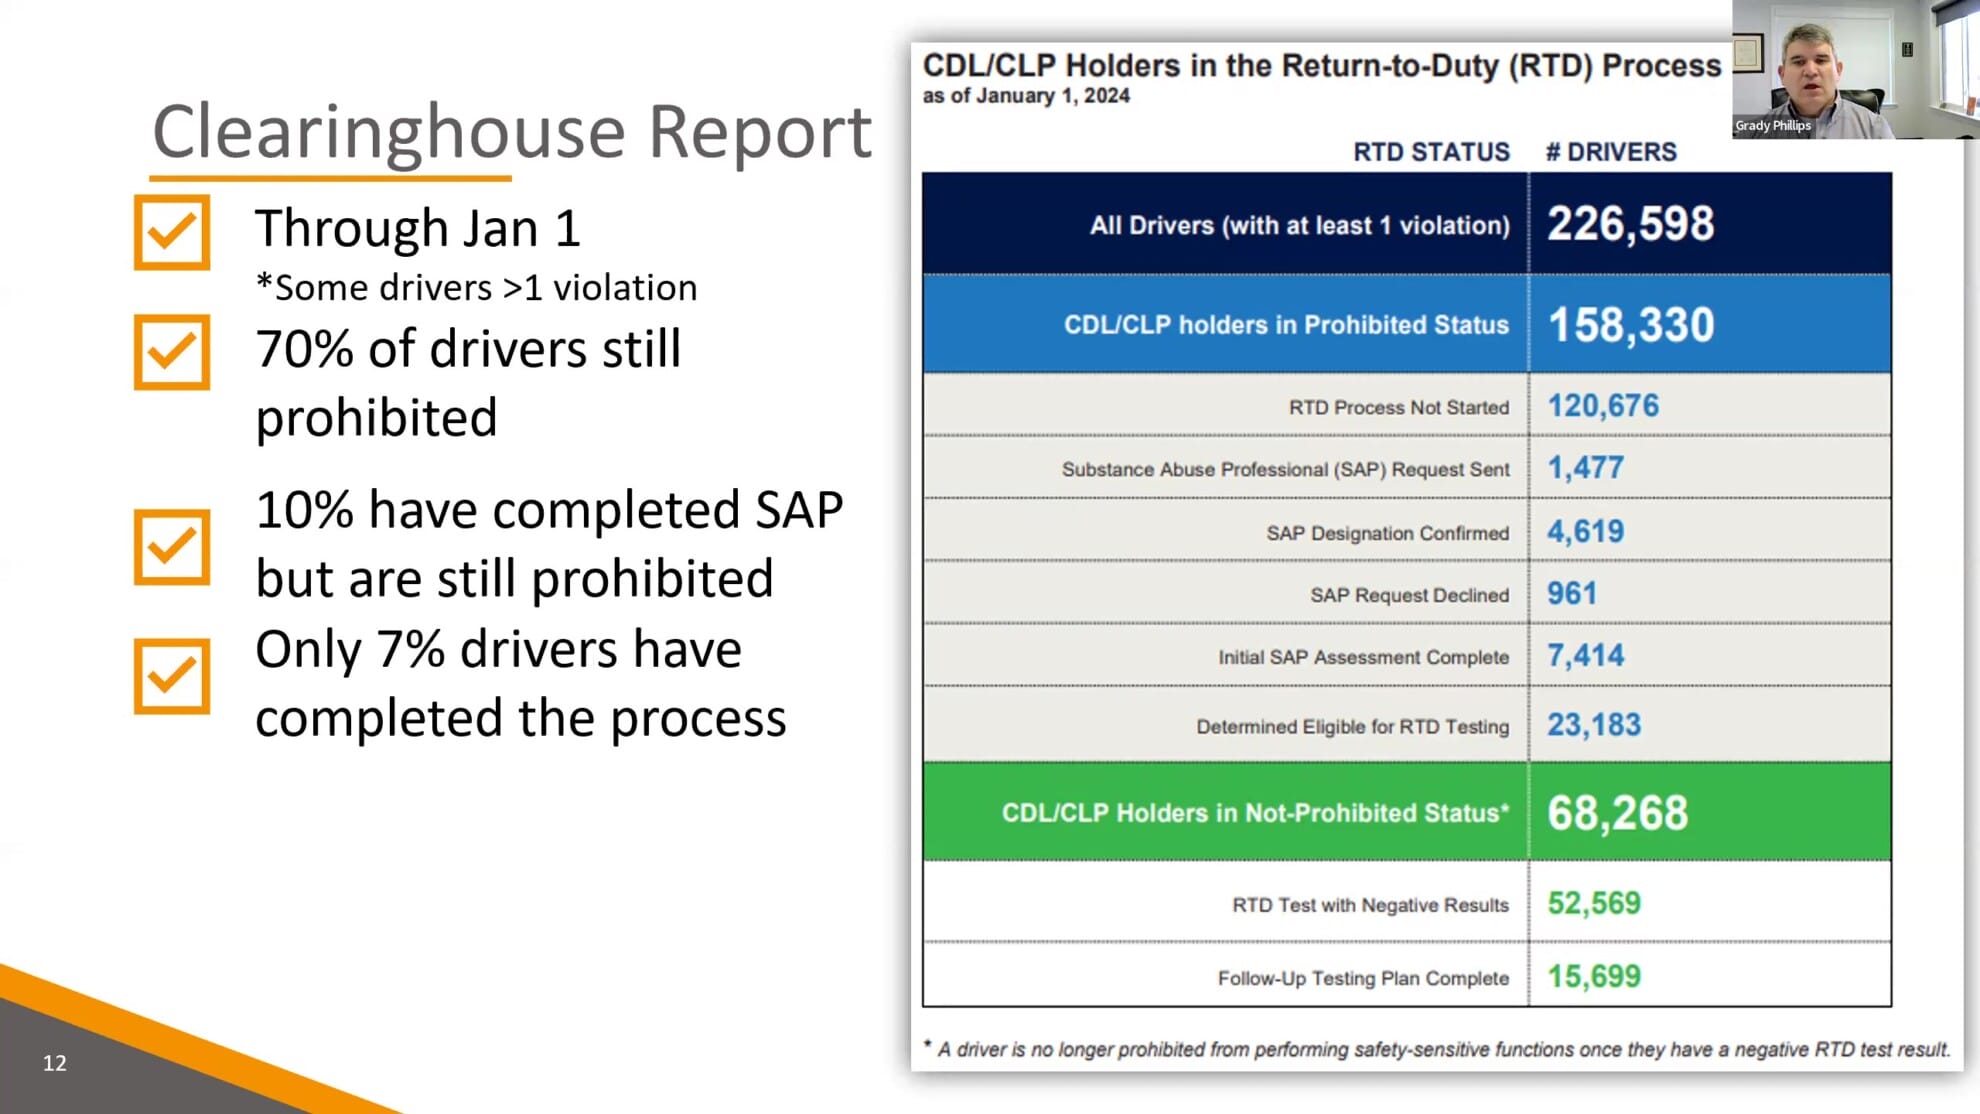 Drug Clearinghouse Report CDL / CLP Holders in the Return to Duty RTD Process